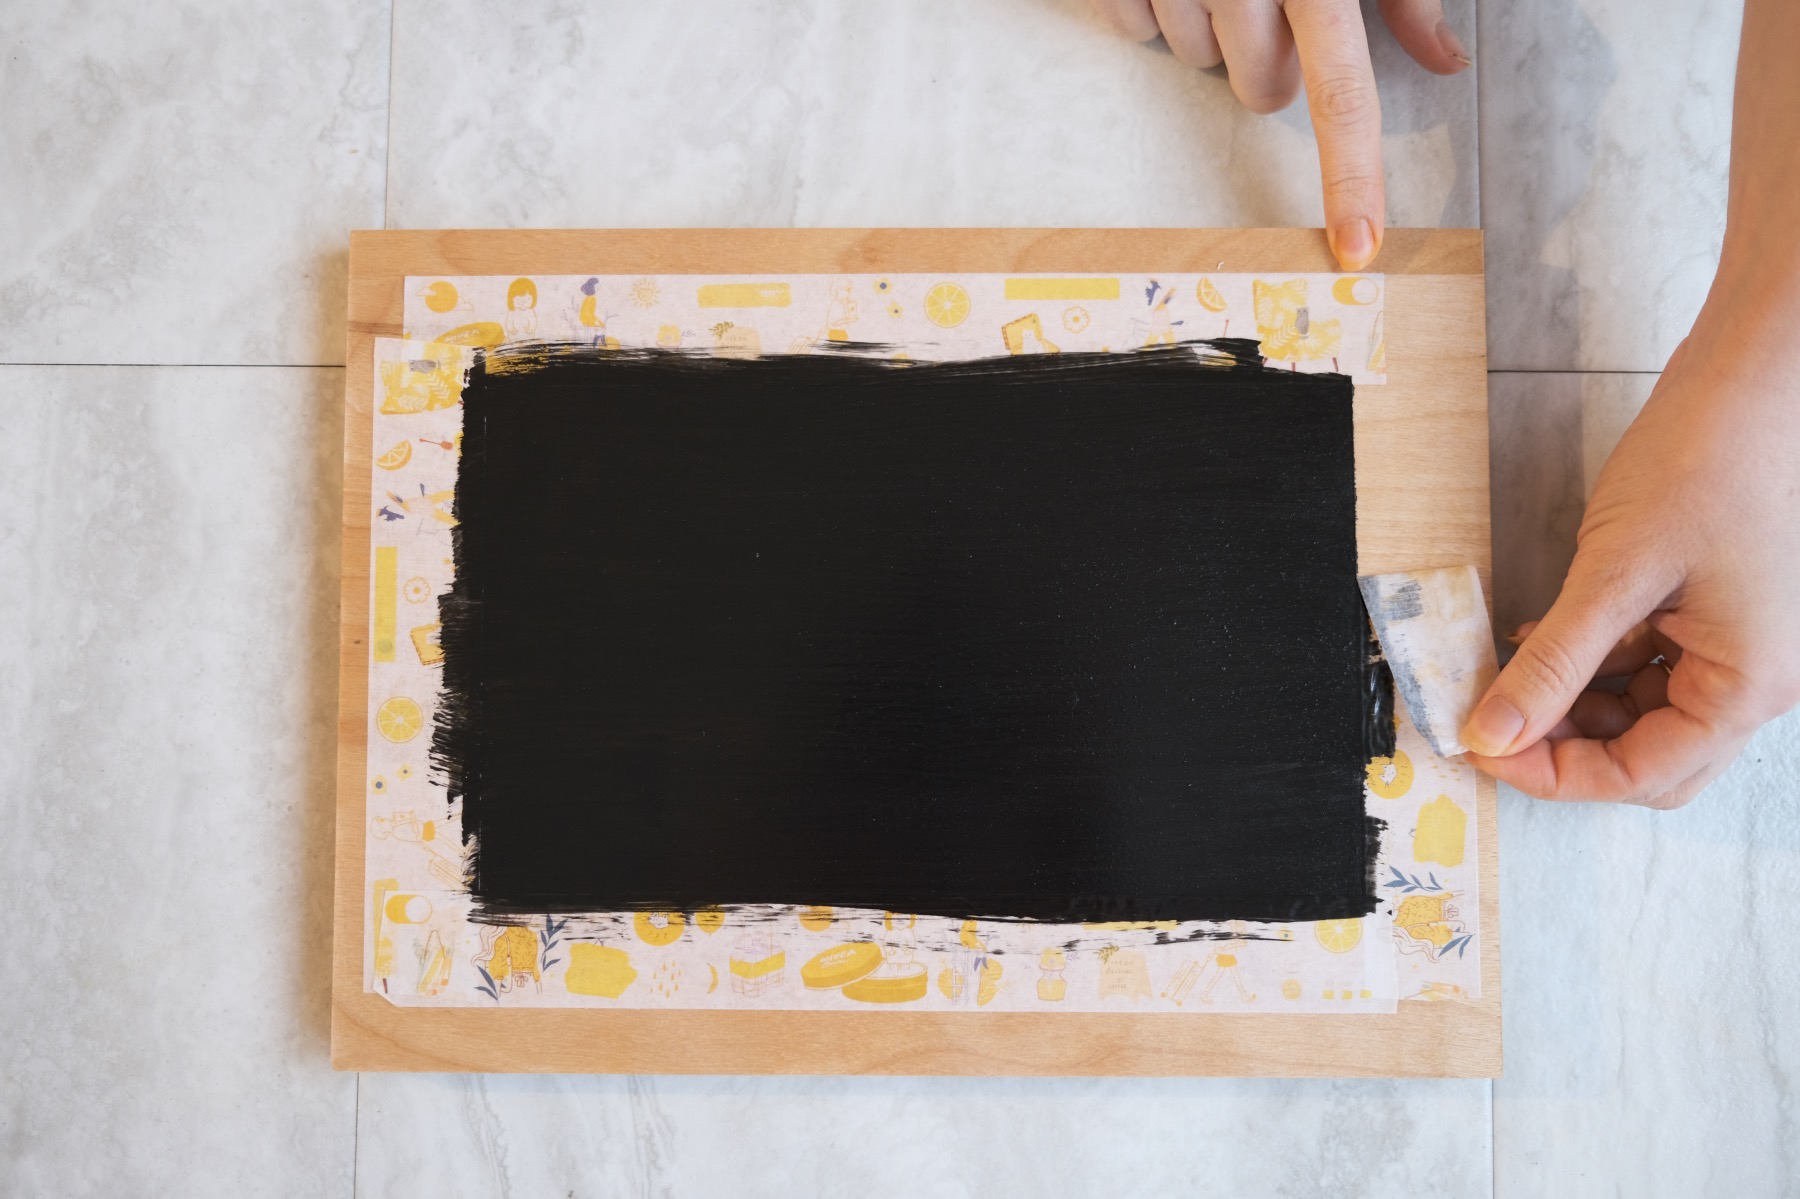 remove the washi tape to reveal the chalkboard